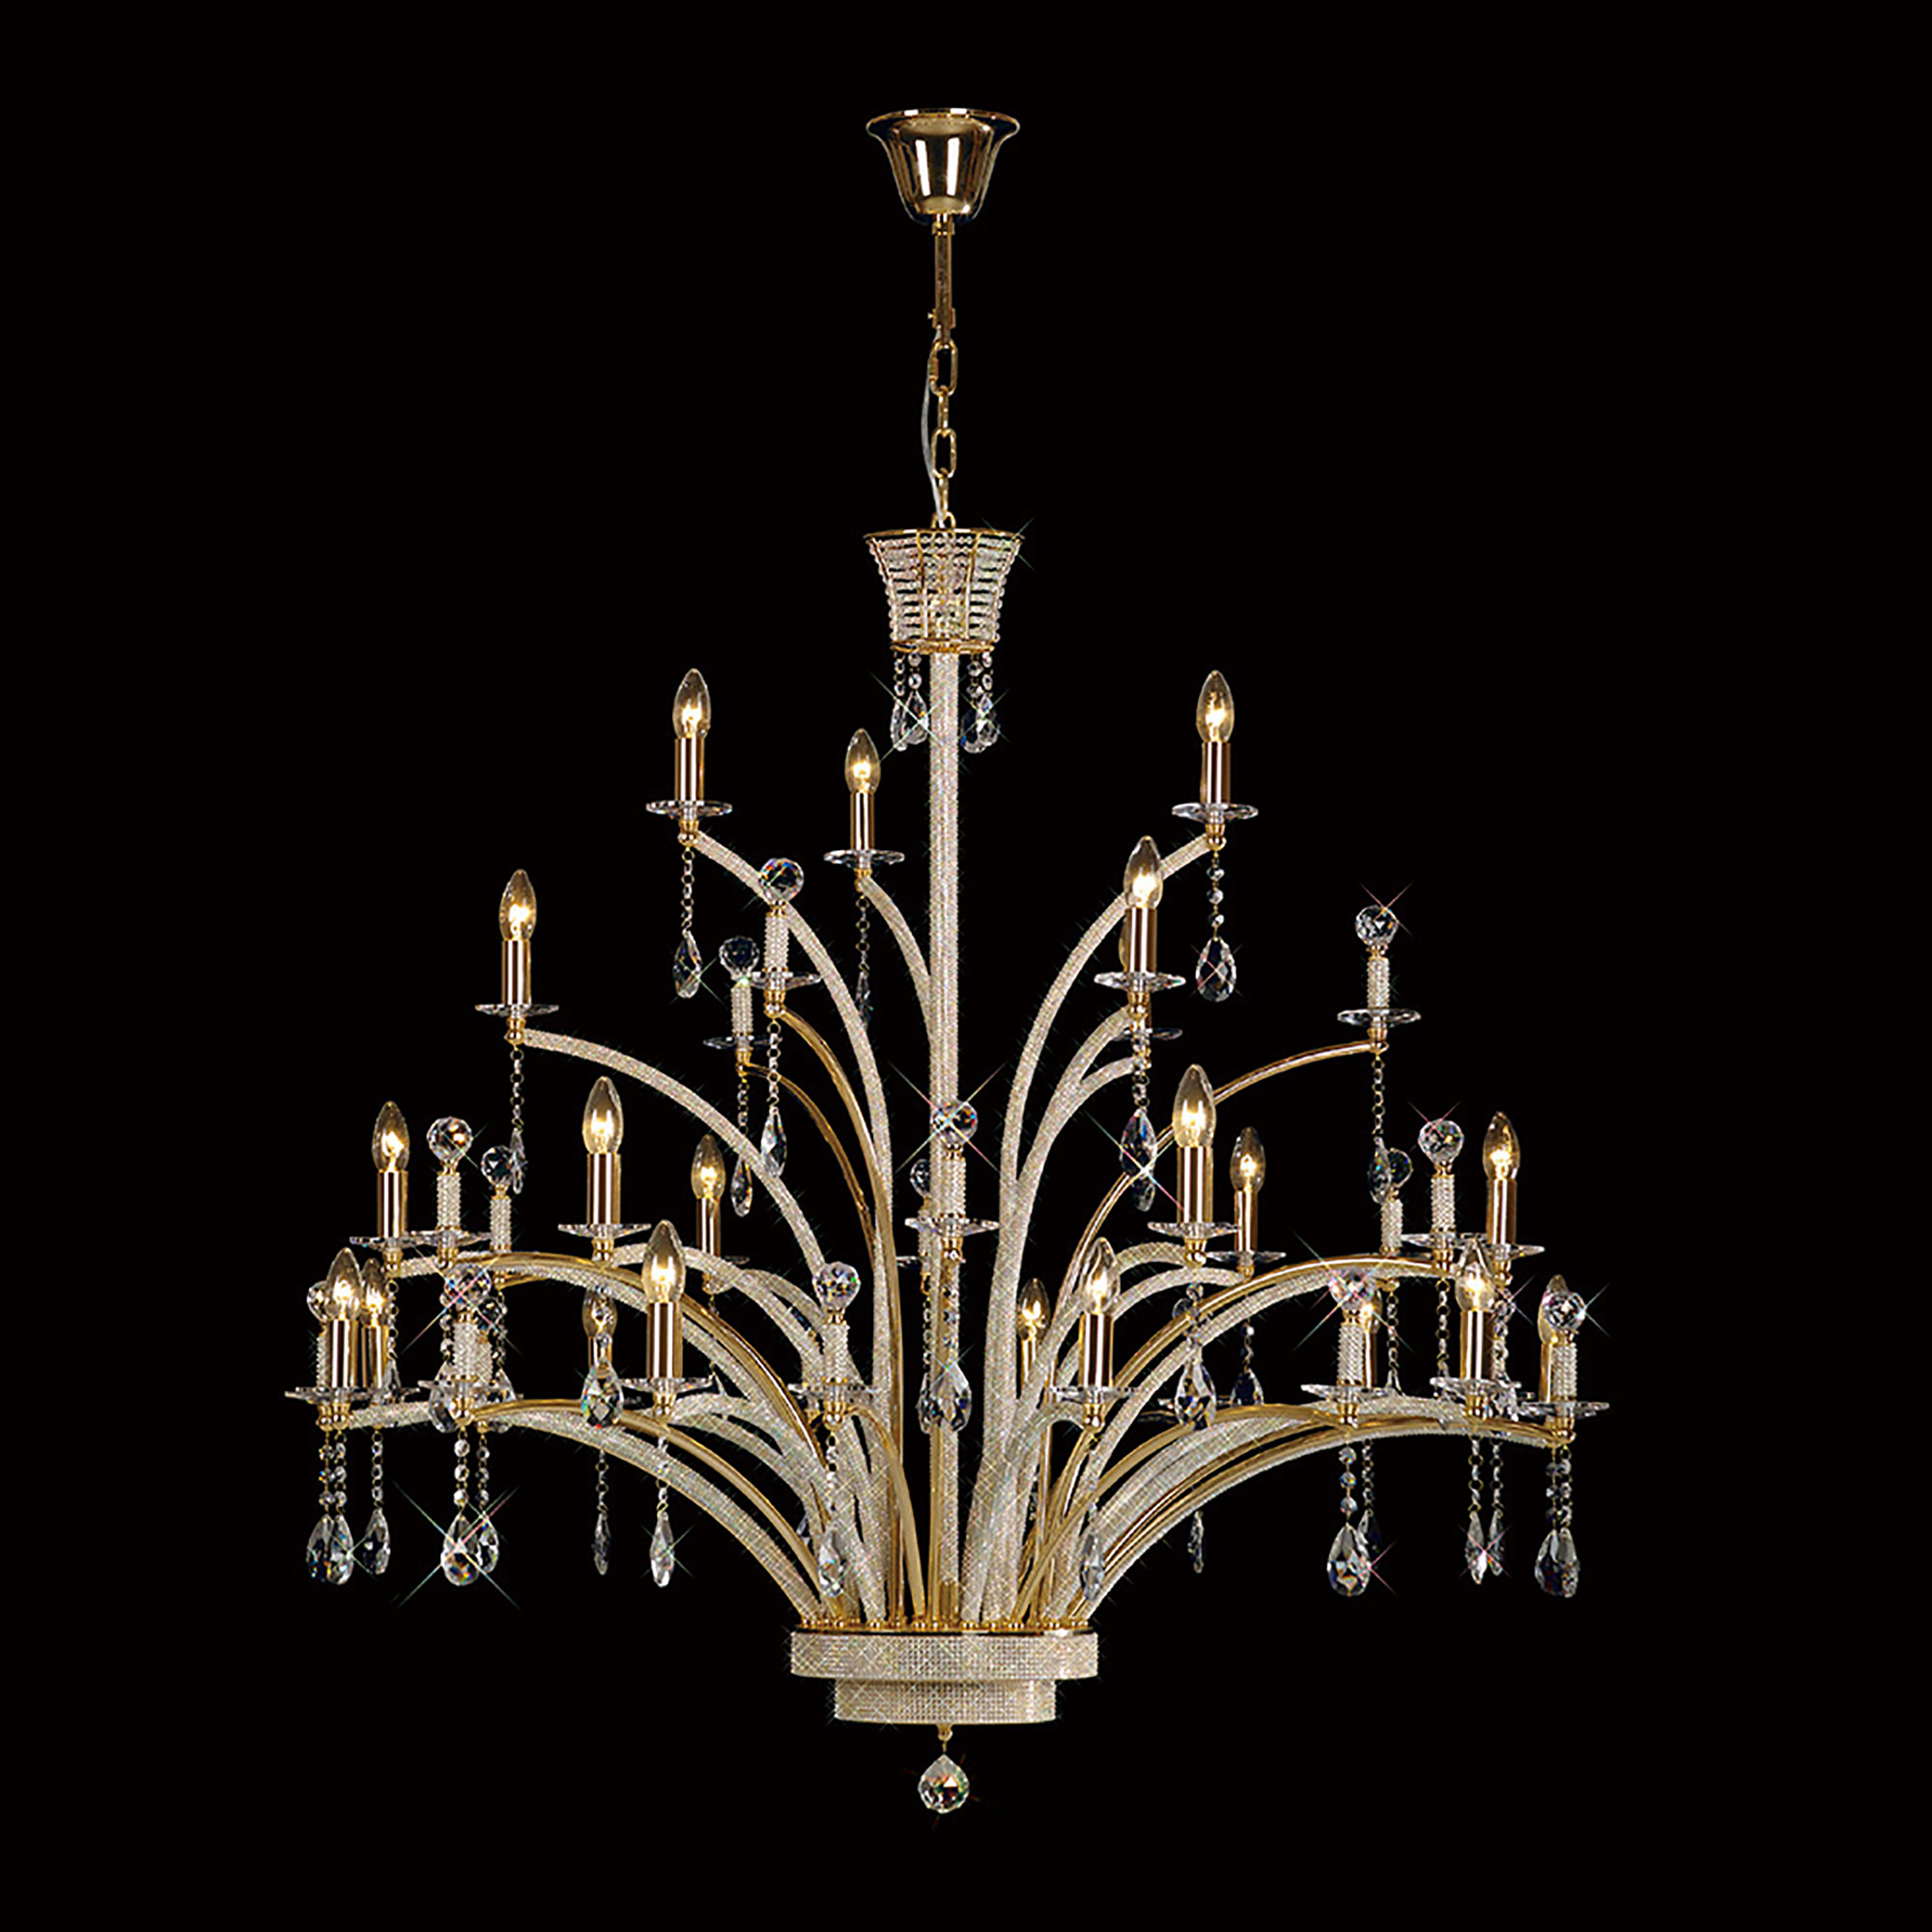 IL30390  Orlando Crystal Chandelier 21 Light (30kg) French Gold